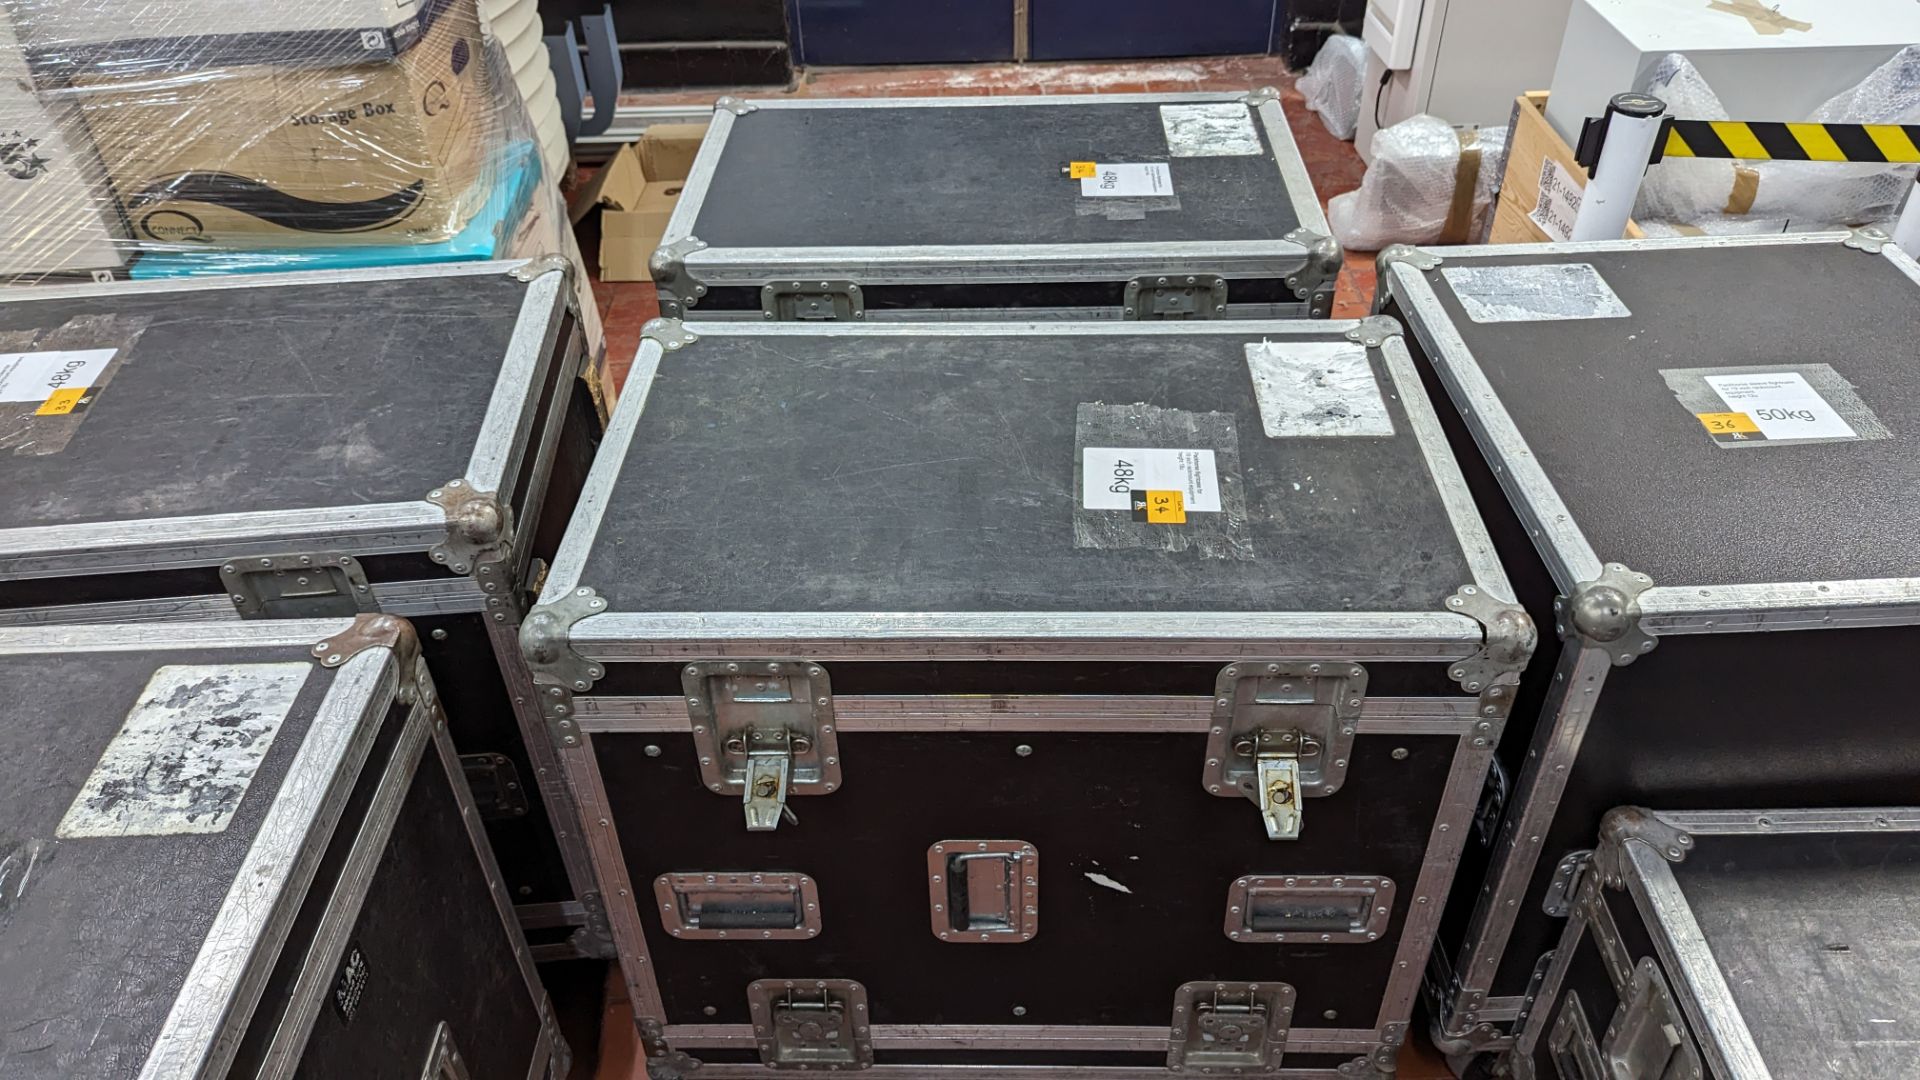 2 off Packhorse mobile flight cases for 19" rack mount equipment. Height per case 18u, weight per f